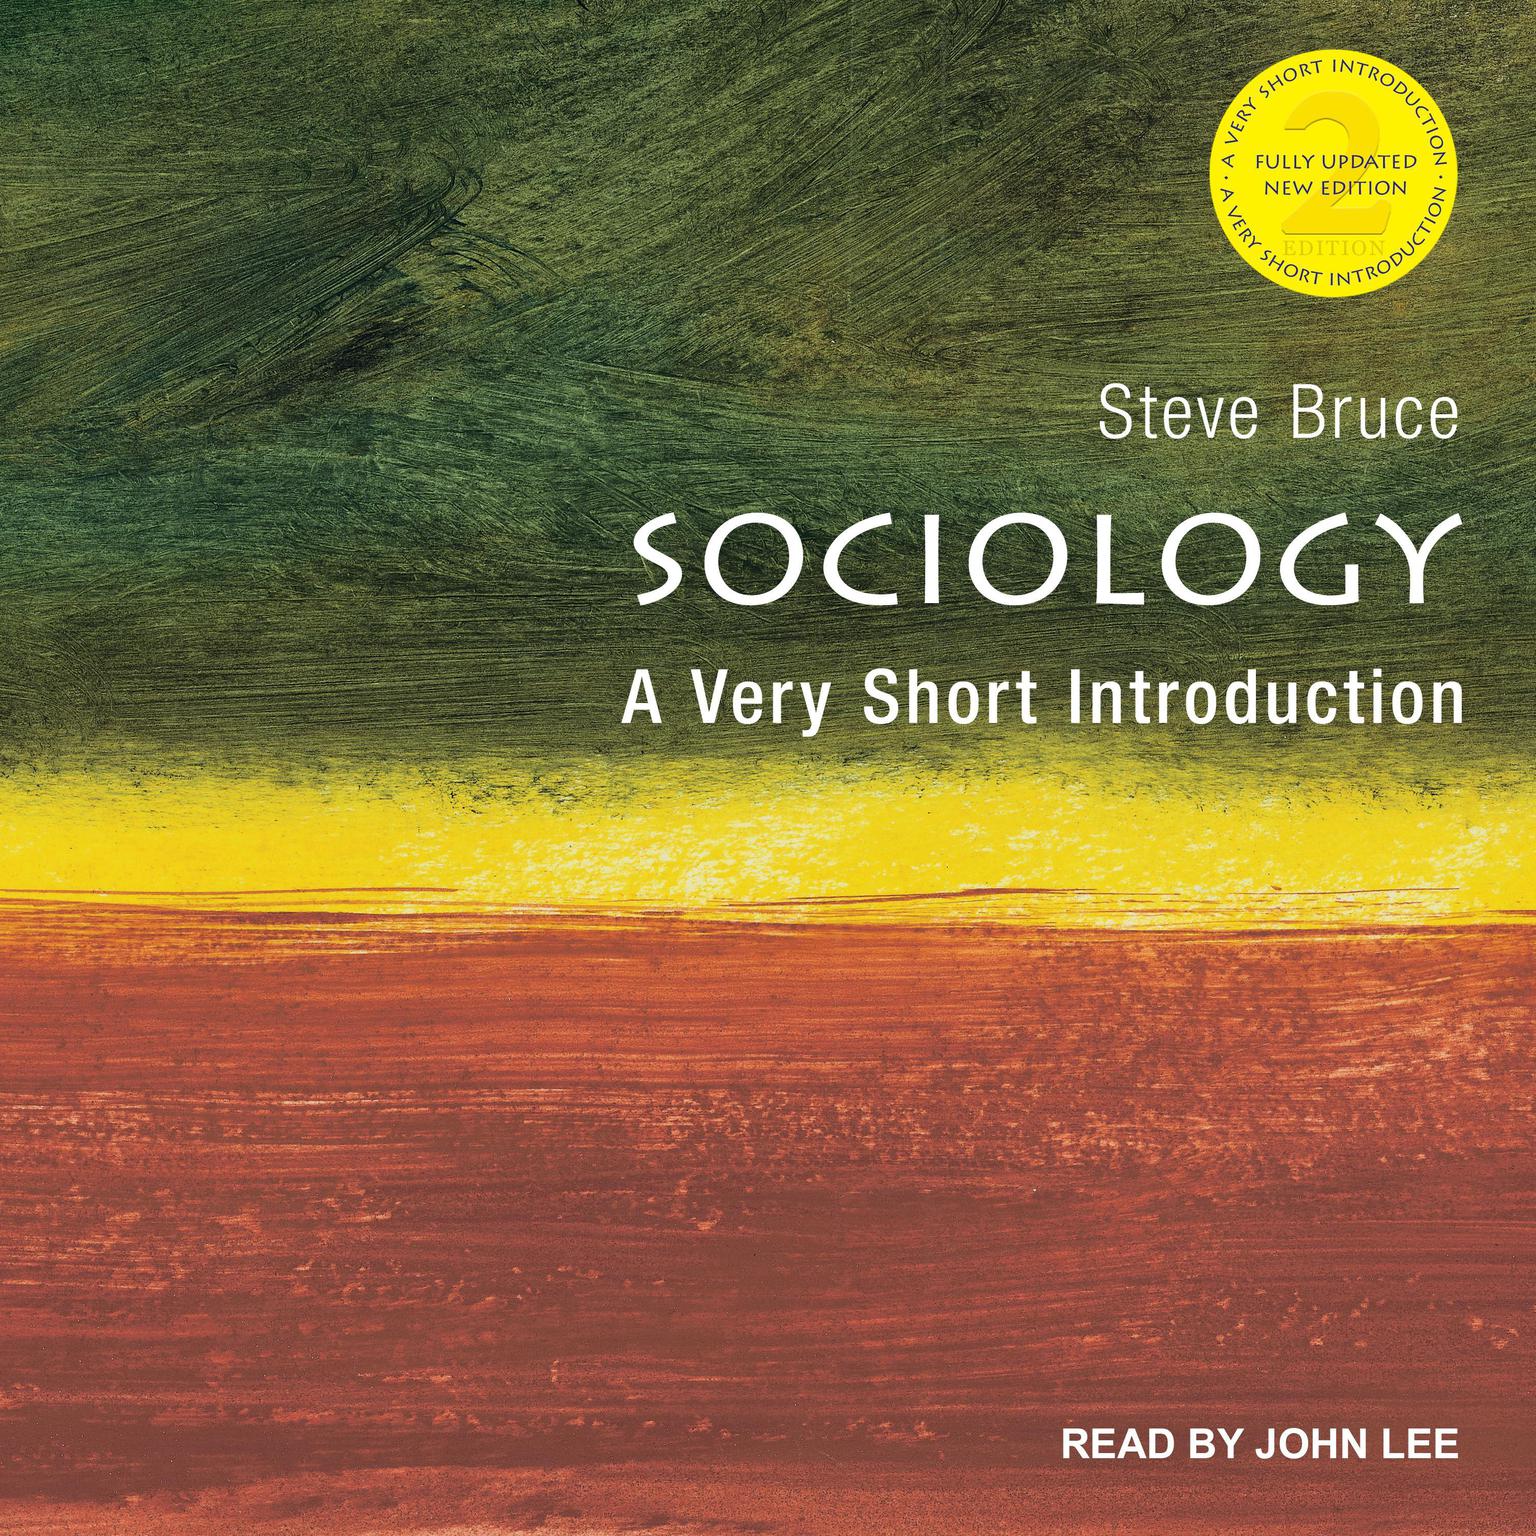 Sociology: A Very Short Introduction, 2nd Edition Audiobook, by Steve Bruce